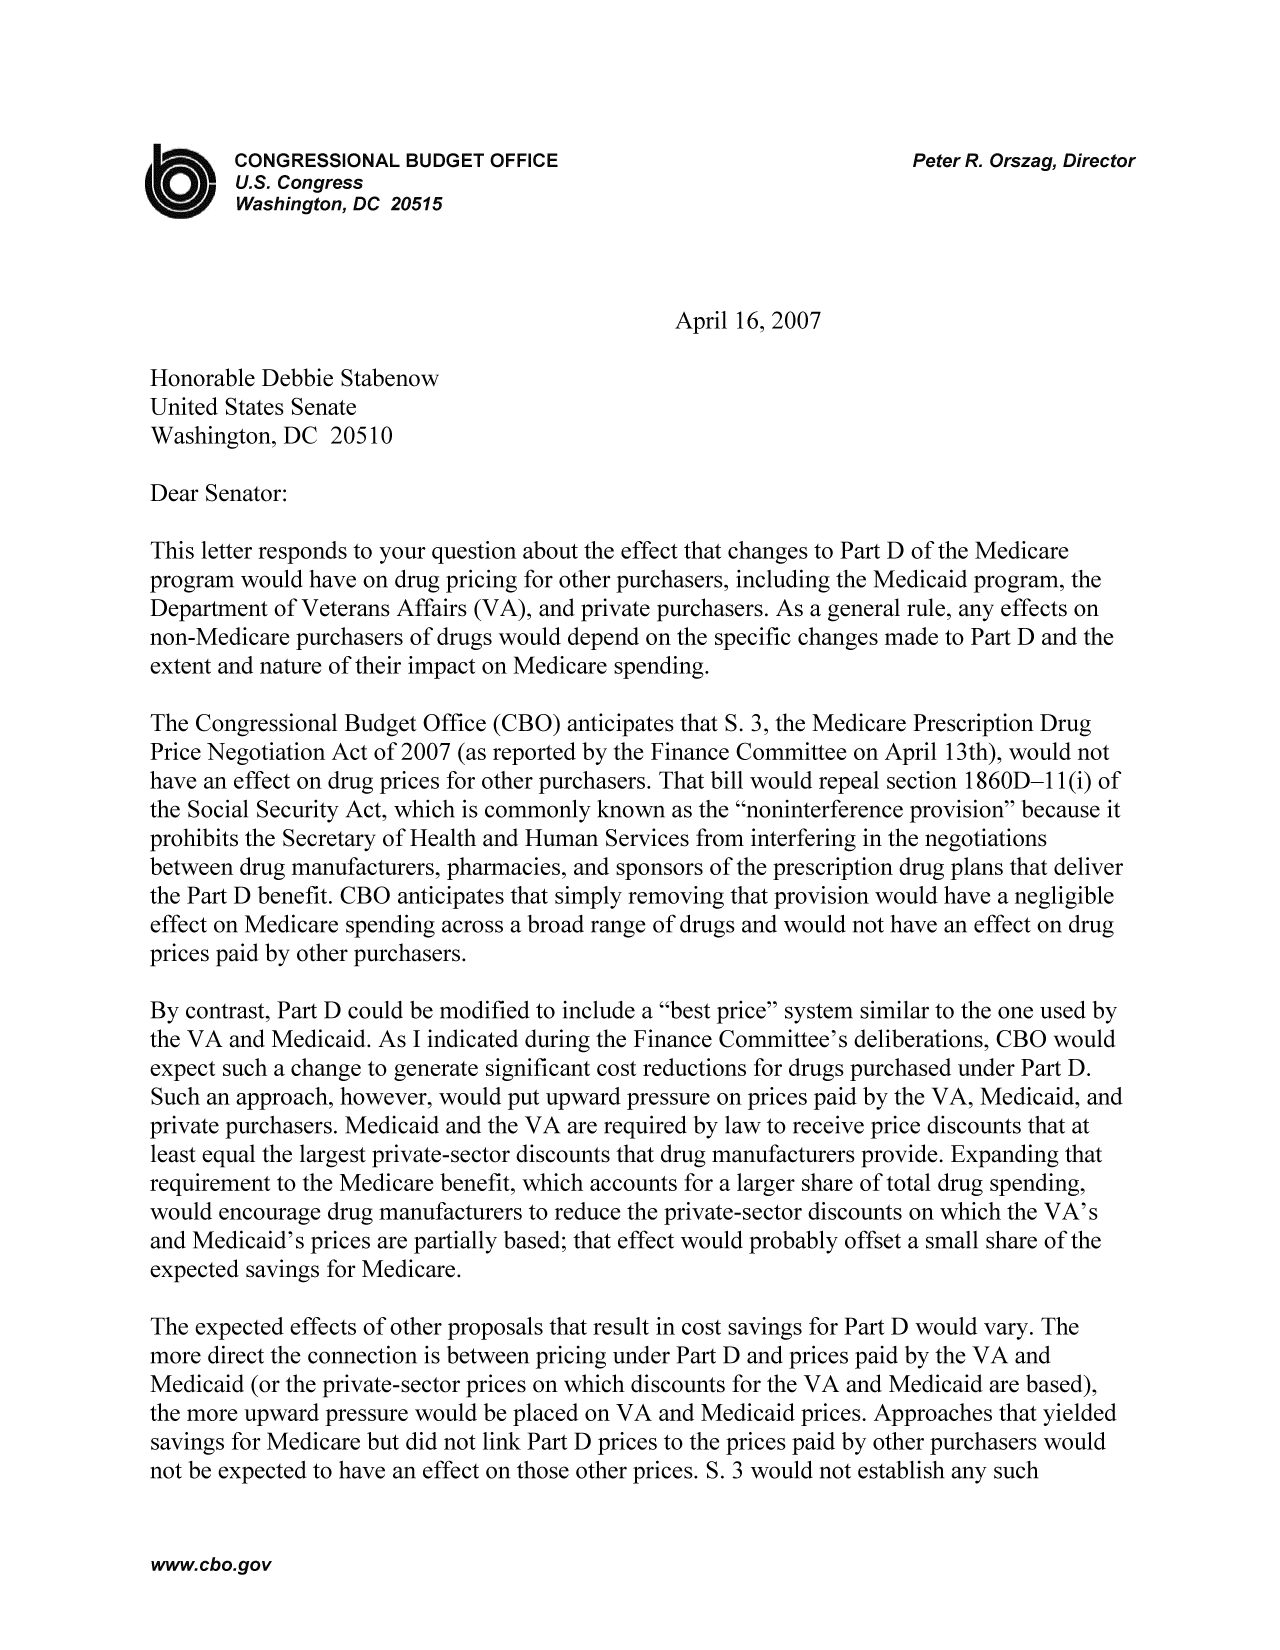 handle is hein.congrec/cbo9301 and id is 1 raw text is: CONGRESSIONAL BUDGET OFFICE                              Peter R. Orszag, Director
U.S. Congress
Washington, DC 20515
April 16, 2007
Honorable Debbie Stabenow
United States Senate
Washington, DC 20510
Dear Senator:
This letter responds to your question about the effect that changes to Part D of the Medicare
program would have on drug pricing for other purchasers, including the Medicaid program, the
Department of Veterans Affairs (VA), and private purchasers. As a general rule, any effects on
non-Medicare purchasers of drugs would depend on the specific changes made to Part D and the
extent and nature of their impact on Medicare spending.
The Congressional Budget Office (CBO) anticipates that S. 3, the Medicare Prescription Drug
Price Negotiation Act of 2007 (as reported by the Finance Committee on April 13th), would not
have an effect on drug prices for other purchasers. That bill would repeal section 1860D-11(i) of
the Social Security Act, which is commonly known as the noninterference provision because it
prohibits the Secretary of Health and Human Services from interfering in the negotiations
between drug manufacturers, pharmacies, and sponsors of the prescription drug plans that deliver
the Part D benefit. CBO anticipates that simply removing that provision would have a negligible
effect on Medicare spending across a broad range of drugs and would not have an effect on drug
prices paid by other purchasers.
By contrast, Part D could be modified to include a best price system similar to the one used by
the VA and Medicaid. As I indicated during the Finance Committee's deliberations, CBO would
expect such a change to generate significant cost reductions for drugs purchased under Part D.
Such an approach, however, would put upward pressure on prices paid by the VA, Medicaid, and
private purchasers. Medicaid and the VA are required by law to receive price discounts that at
least equal the largest private-sector discounts that drug manufacturers provide. Expanding that
requirement to the Medicare benefit, which accounts for a larger share of total drug spending,
would encourage drug manufacturers to reduce the private-sector discounts on which the VA's
and Medicaid's prices are partially based; that effect would probably offset a small share of the
expected savings for Medicare.
The expected effects of other proposals that result in cost savings for Part D would vary. The
more direct the connection is between pricing under Part D and prices paid by the VA and
Medicaid (or the private-sector prices on which discounts for the VA and Medicaid are based),
the more upward pressure would be placed on VA and Medicaid prices. Approaches that yielded
savings for Medicare but did not link Part D prices to the prices paid by other purchasers would
not be expected to have an effect on those other prices. 5. 3 would not establish any such

www.cbo.gov


